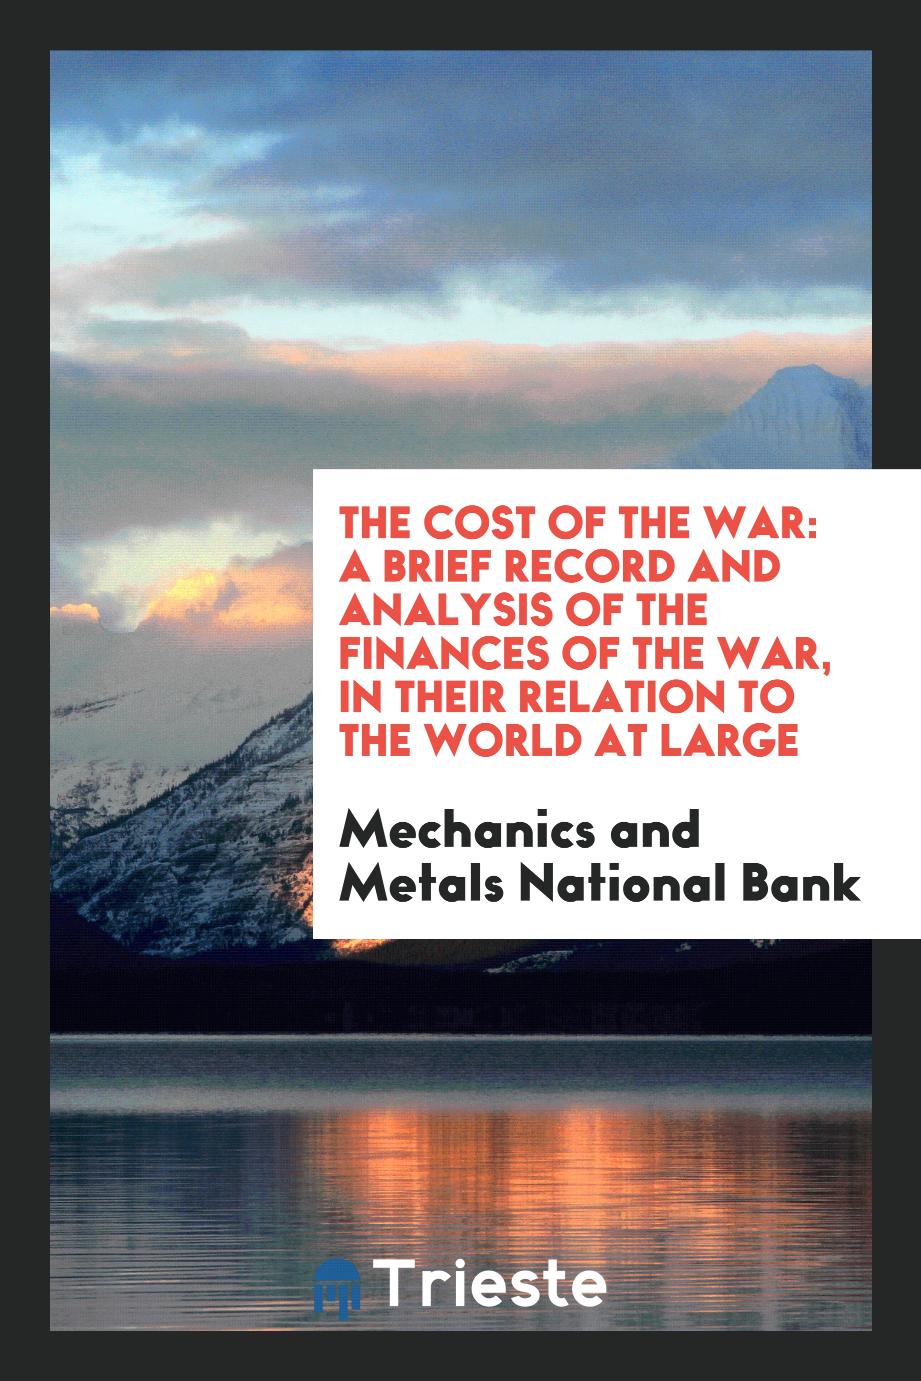 The Cost of the War: A Brief Record and Analysis of the Finances of the War, in Their Relation to the World at Large